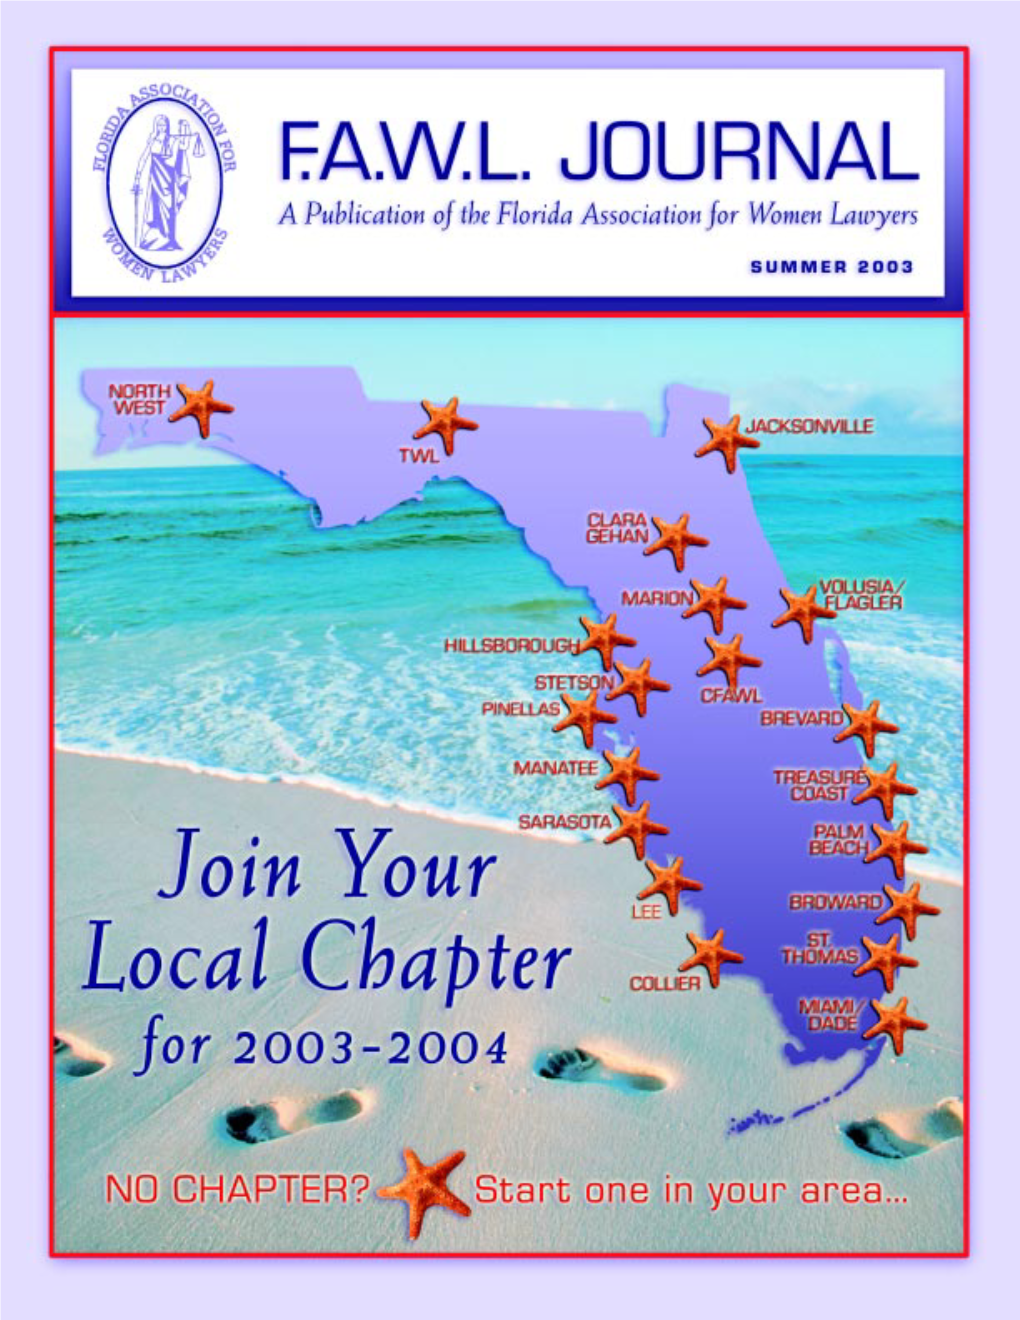 Summer 2003 • FAWL Journal Was Beaming with Pictures and Details